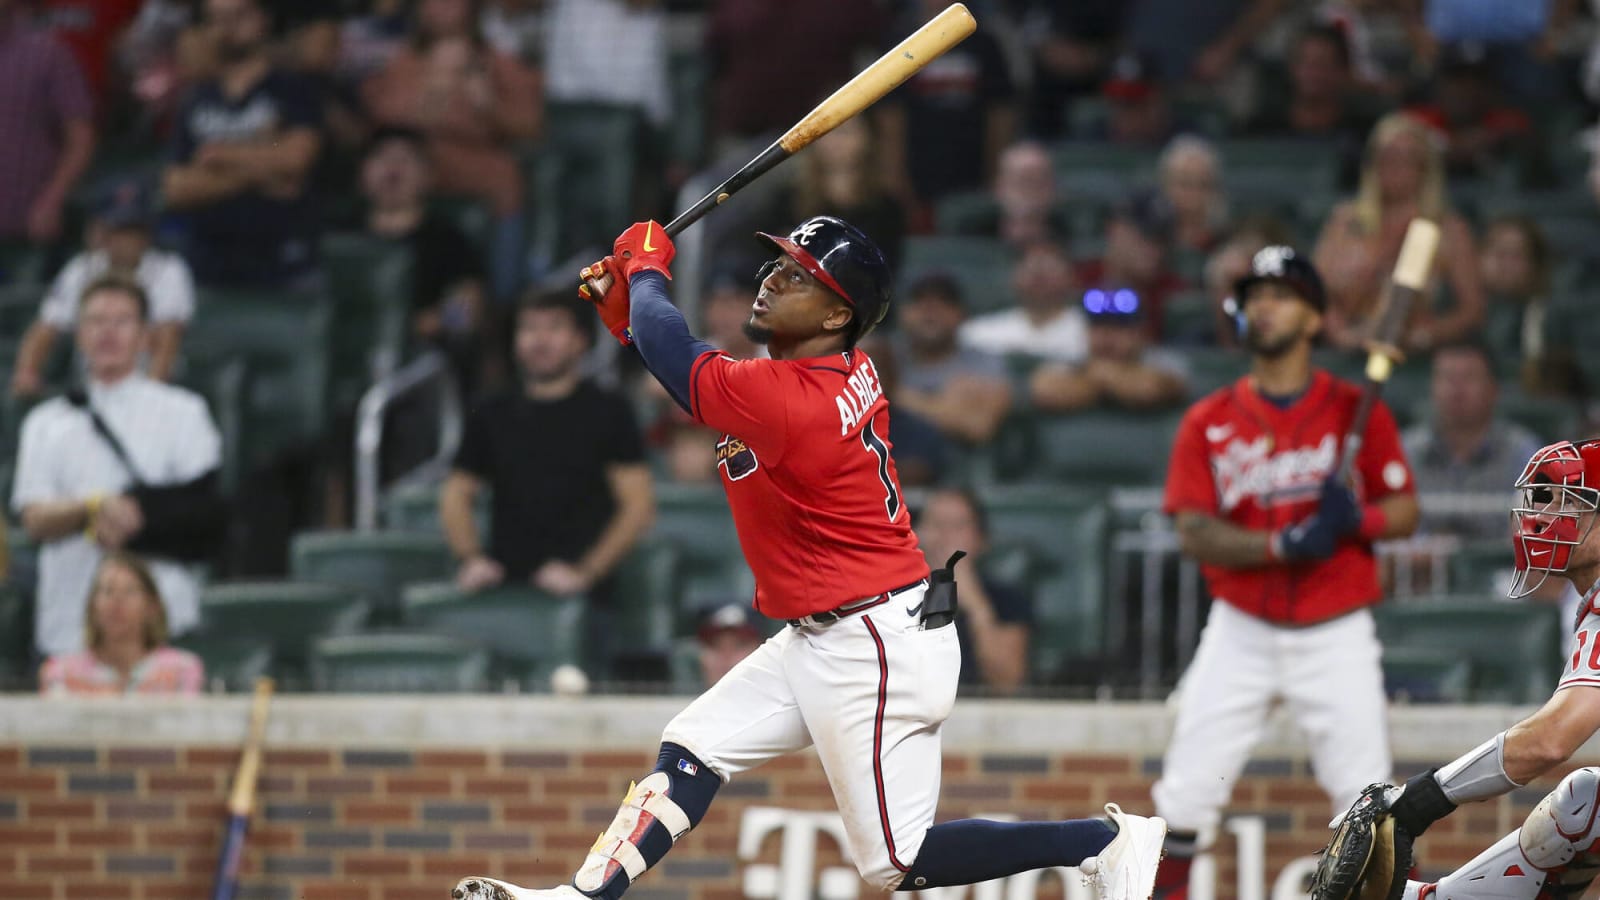  Could we see Ozzie Albies in the playoffs?